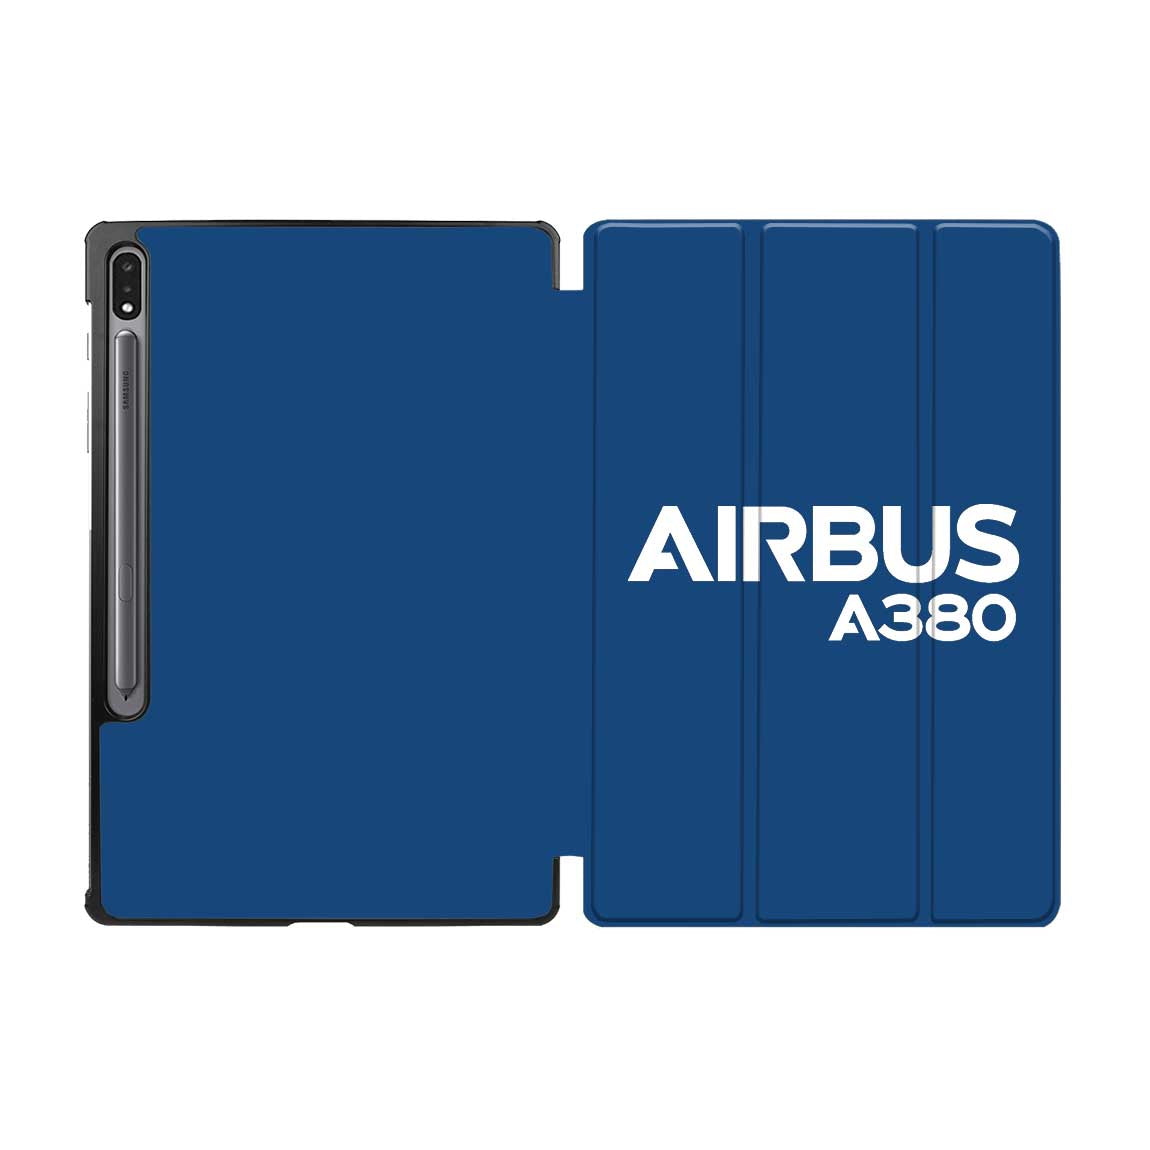 Airbus A380 & Text Designed Samsung Tablet Cases